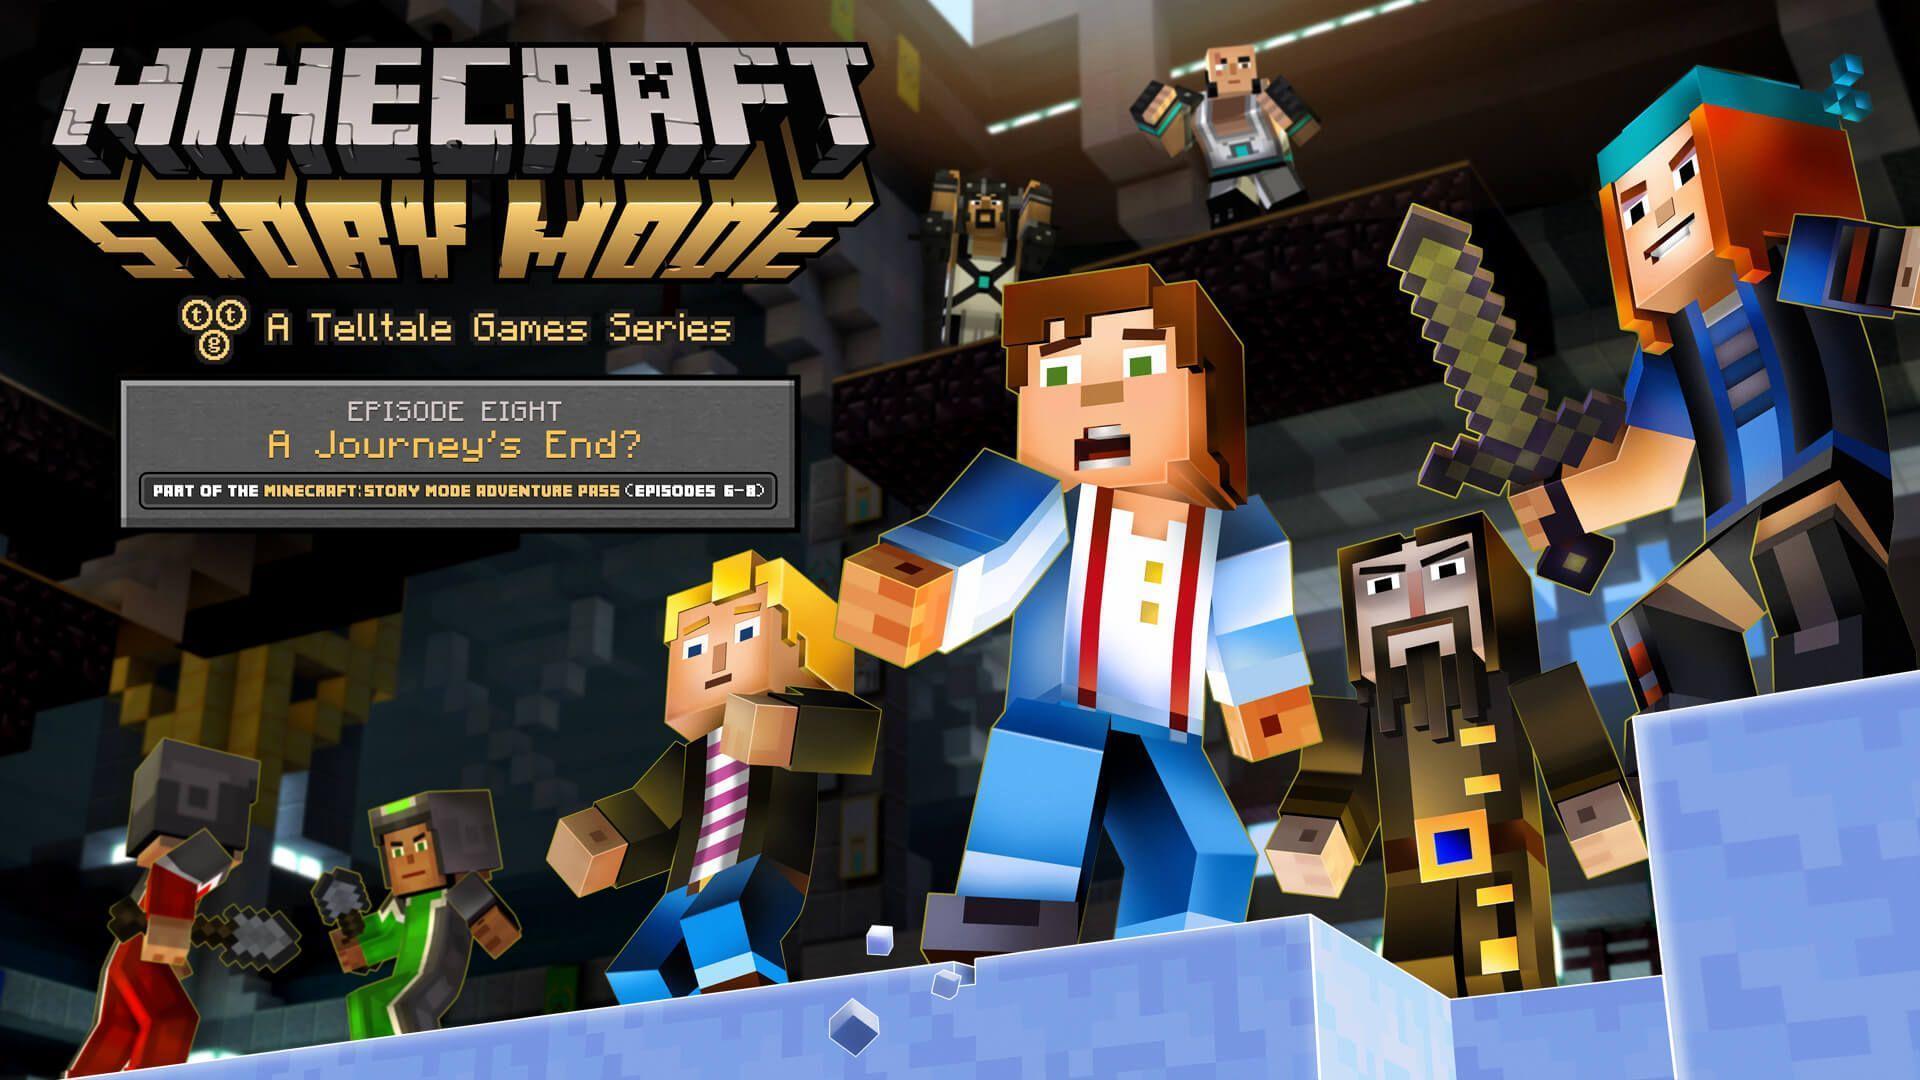 We See A Journey's End In The Last Minecraft Mode Episode